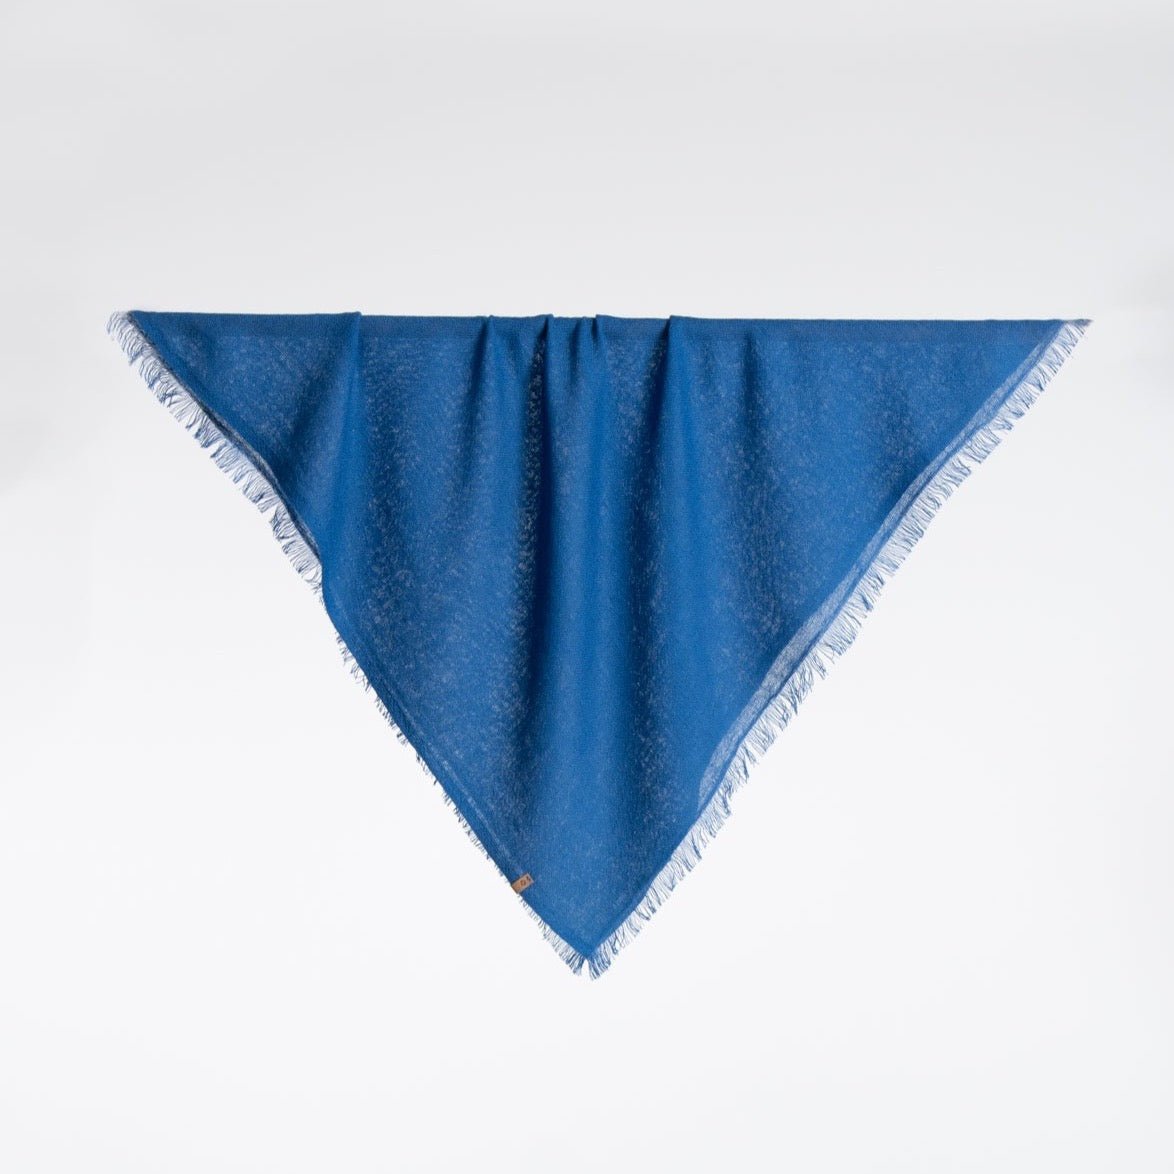 A square scarf made of 100% Merino wool in a deep blue color. The Merino Square Woven Scarf in Ocean Blue is designed by Dinadi and handcrafted in Nepal.